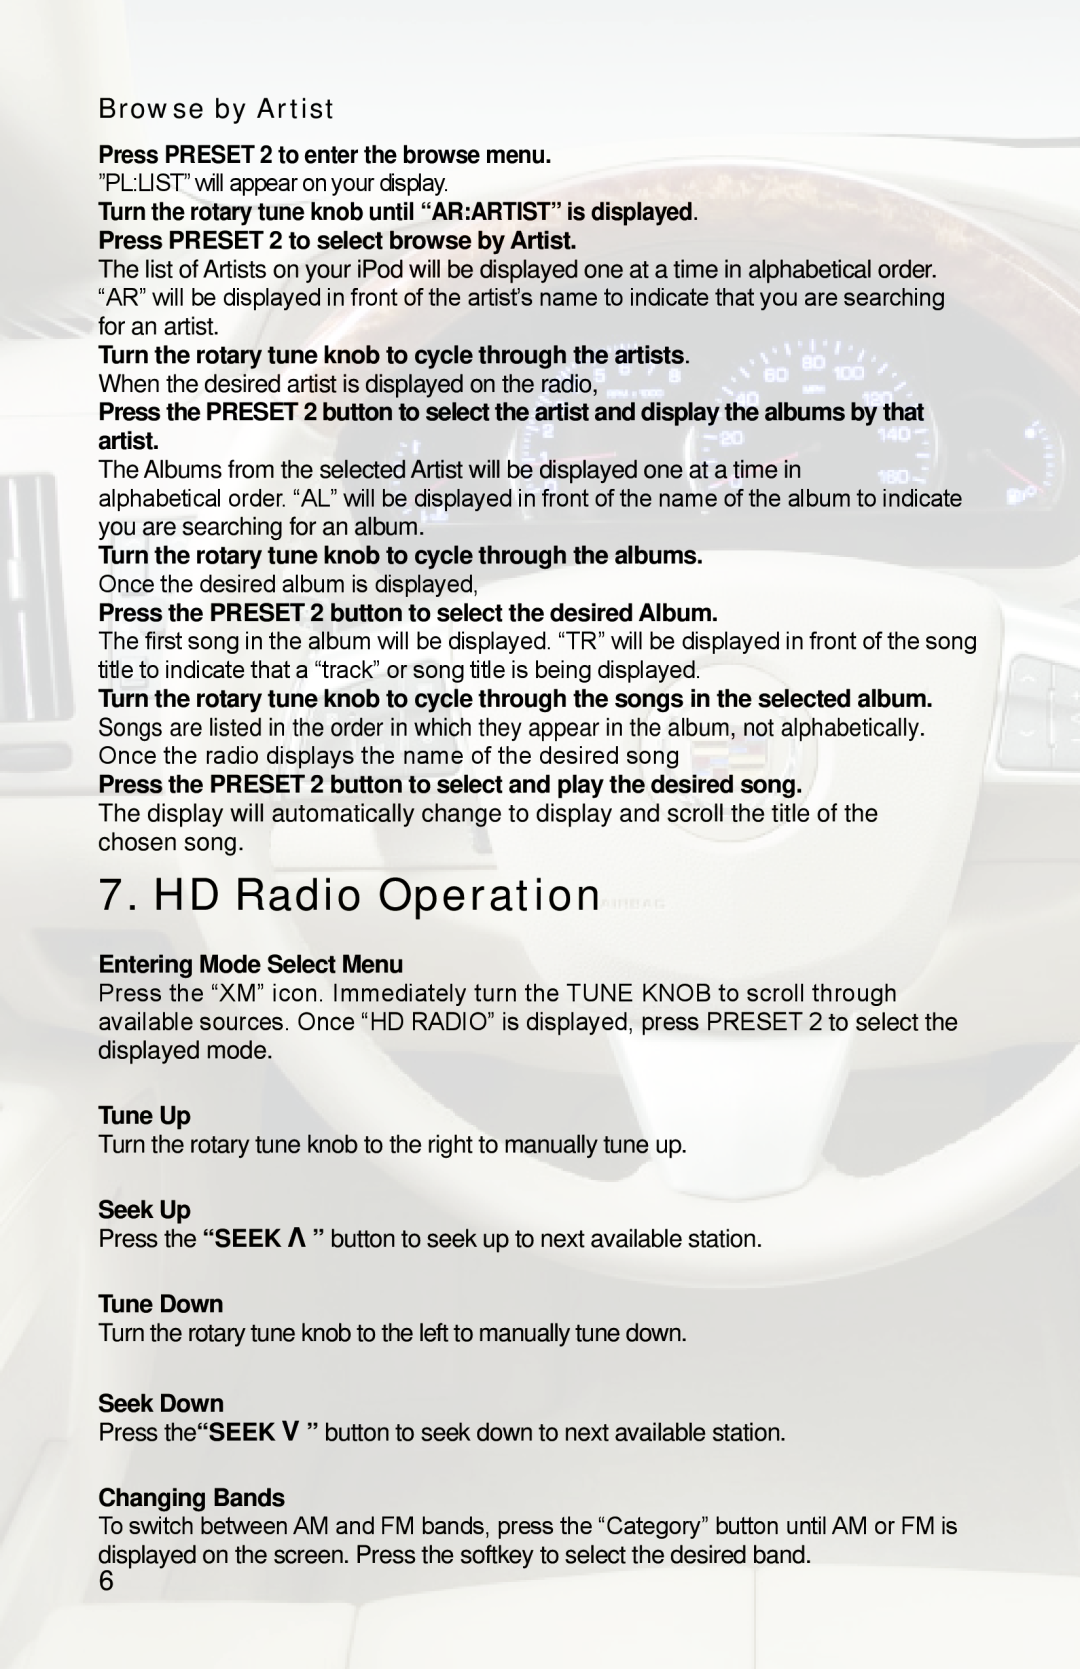 iSimple PGHGM4 owner manual HD Radio Operation, Browse by Artist 